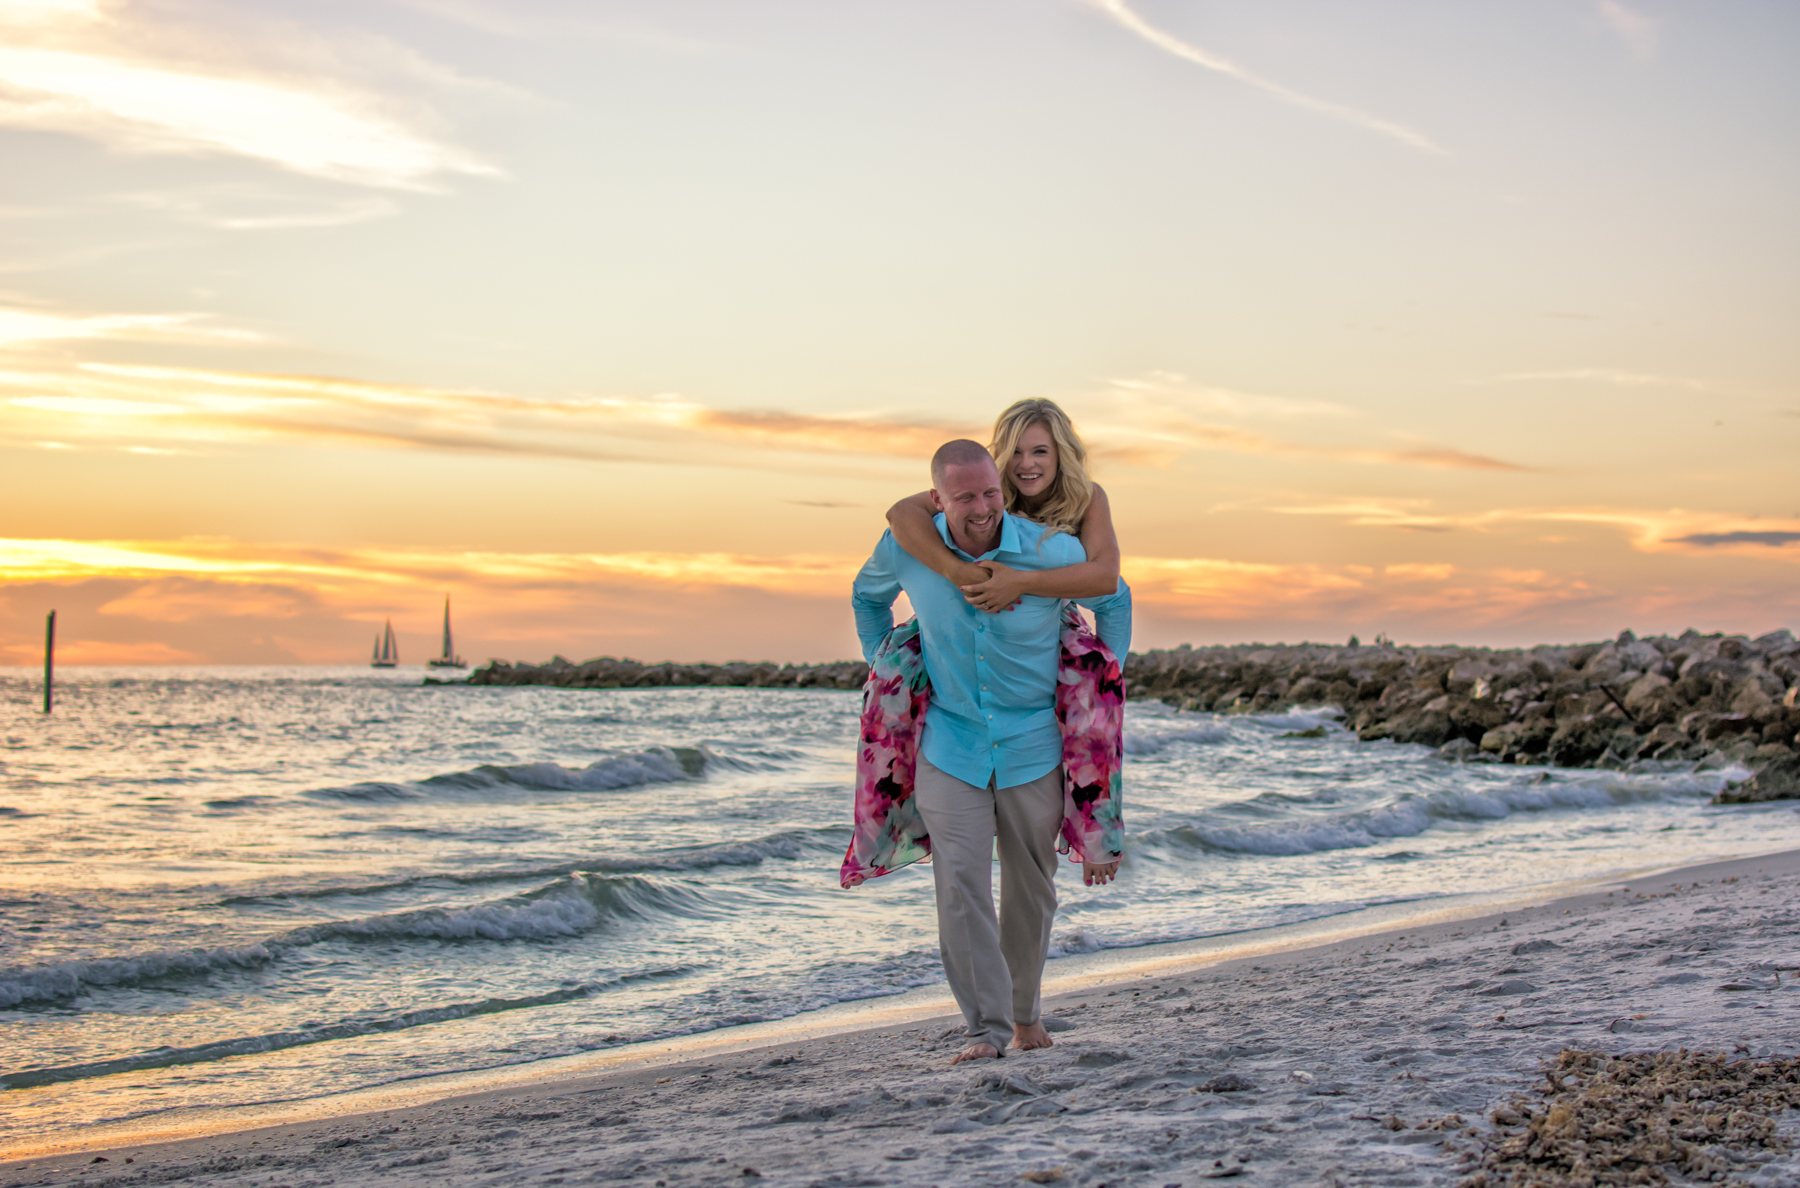 Clearwater Beach Photographers 2019 Sample Images 11